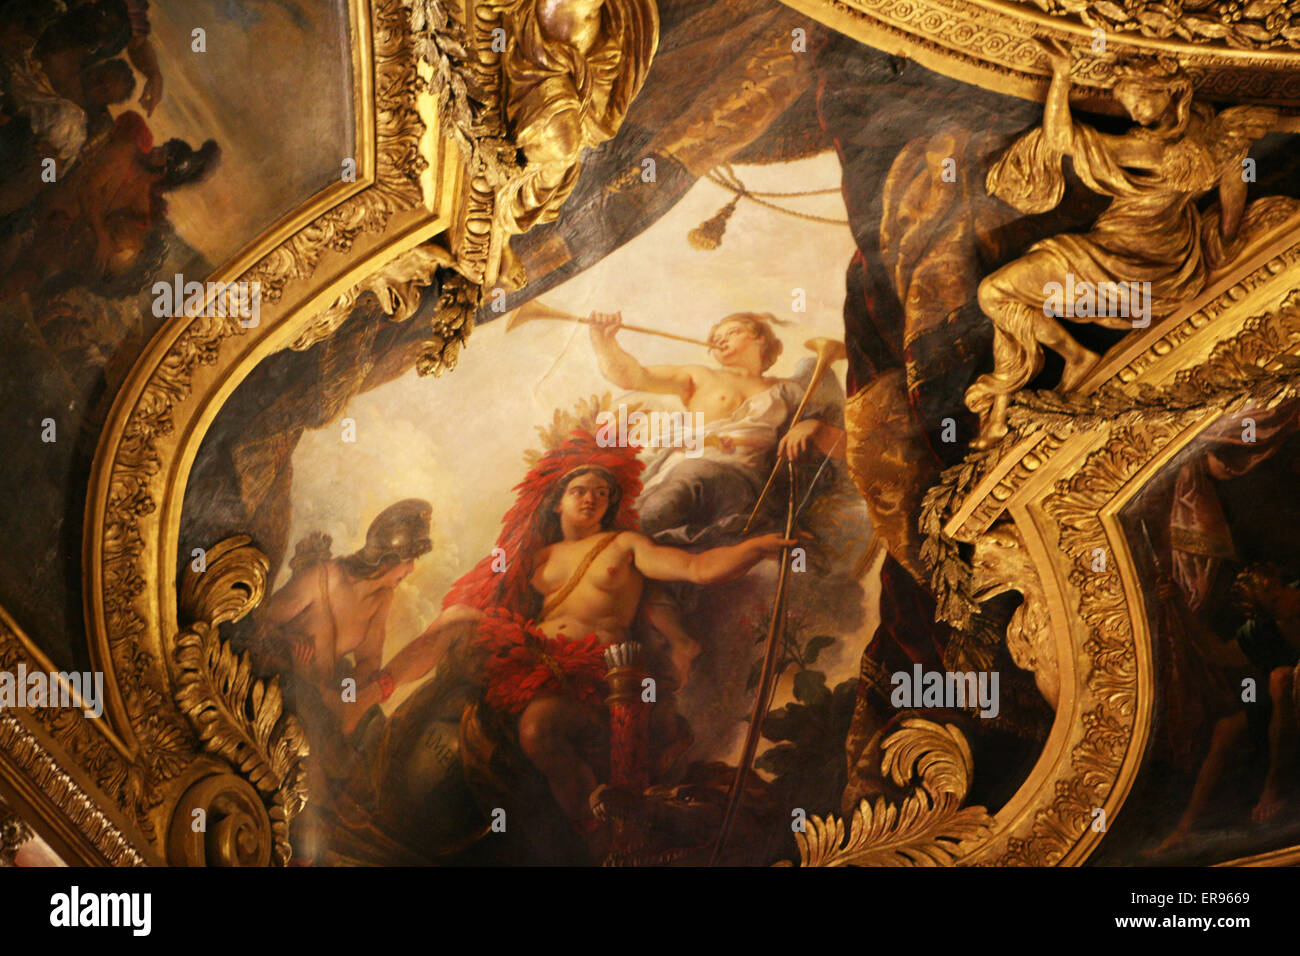 The Apollo Room Palace of Versailles France Stock Photo